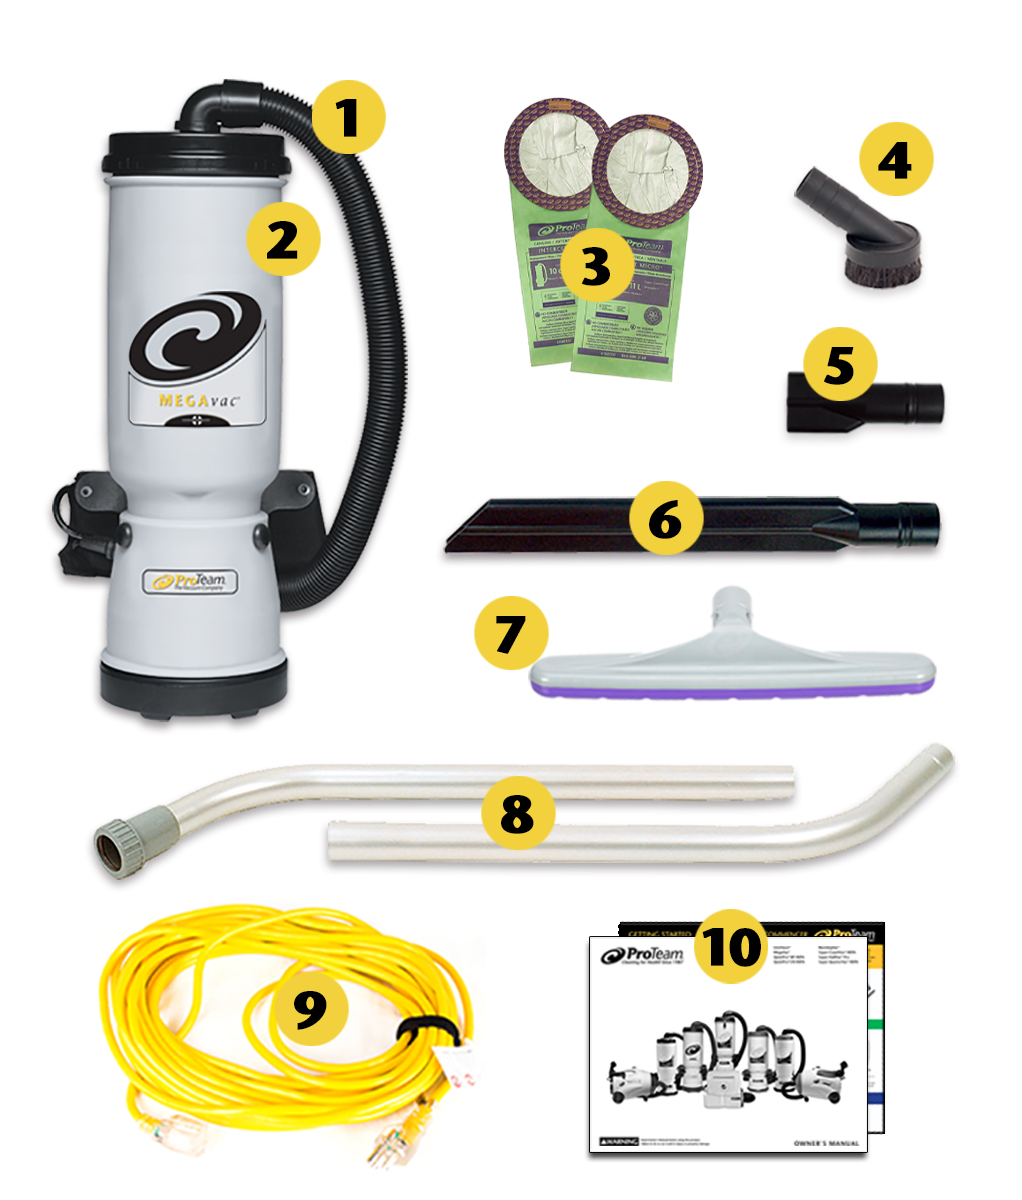 Image of what is included in the box of ProTeam MegaVac, 6 qt. Backpack Vacuum